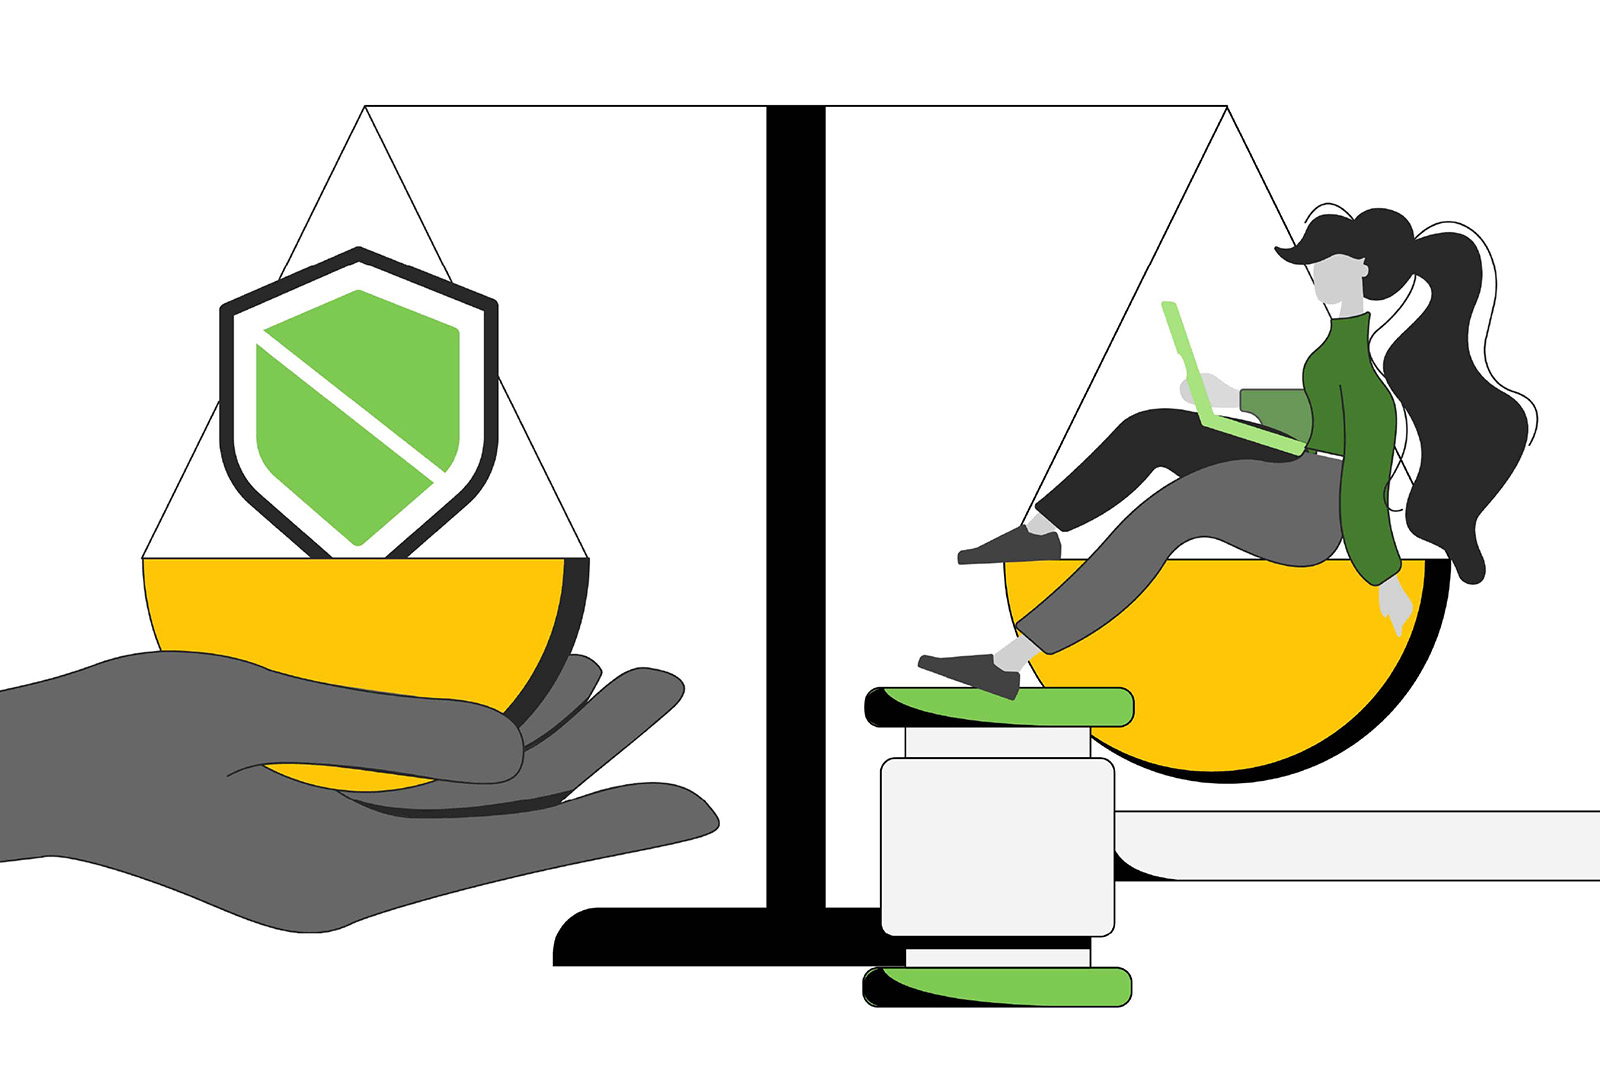 Beside a gavel, a set of scales weighs a person with long hair and laptop one one side, and the icon of a shield supported by a hand in another.